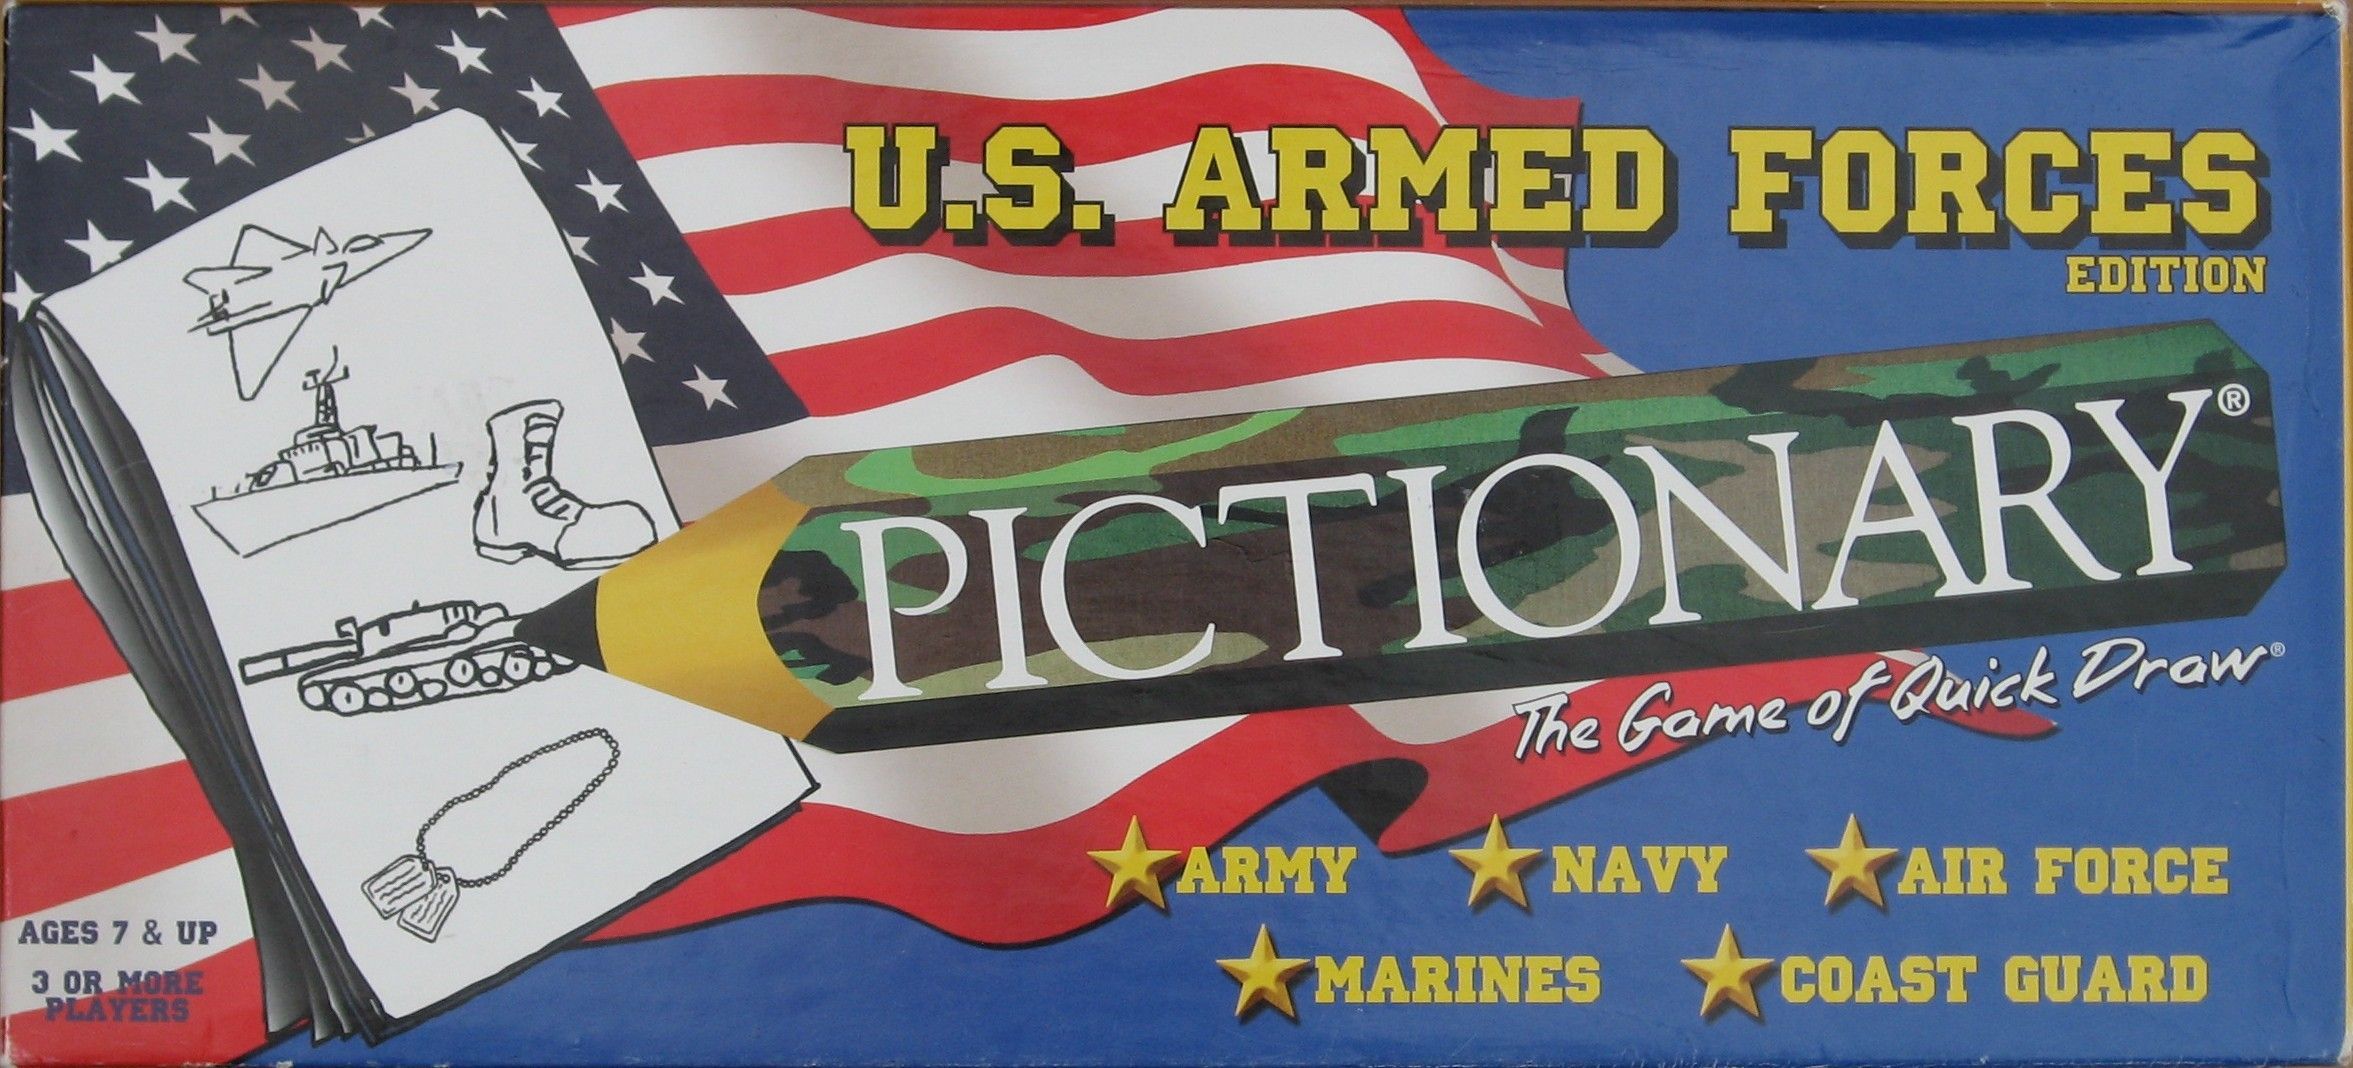 Pictionary: U.S. Armed Forces Edition